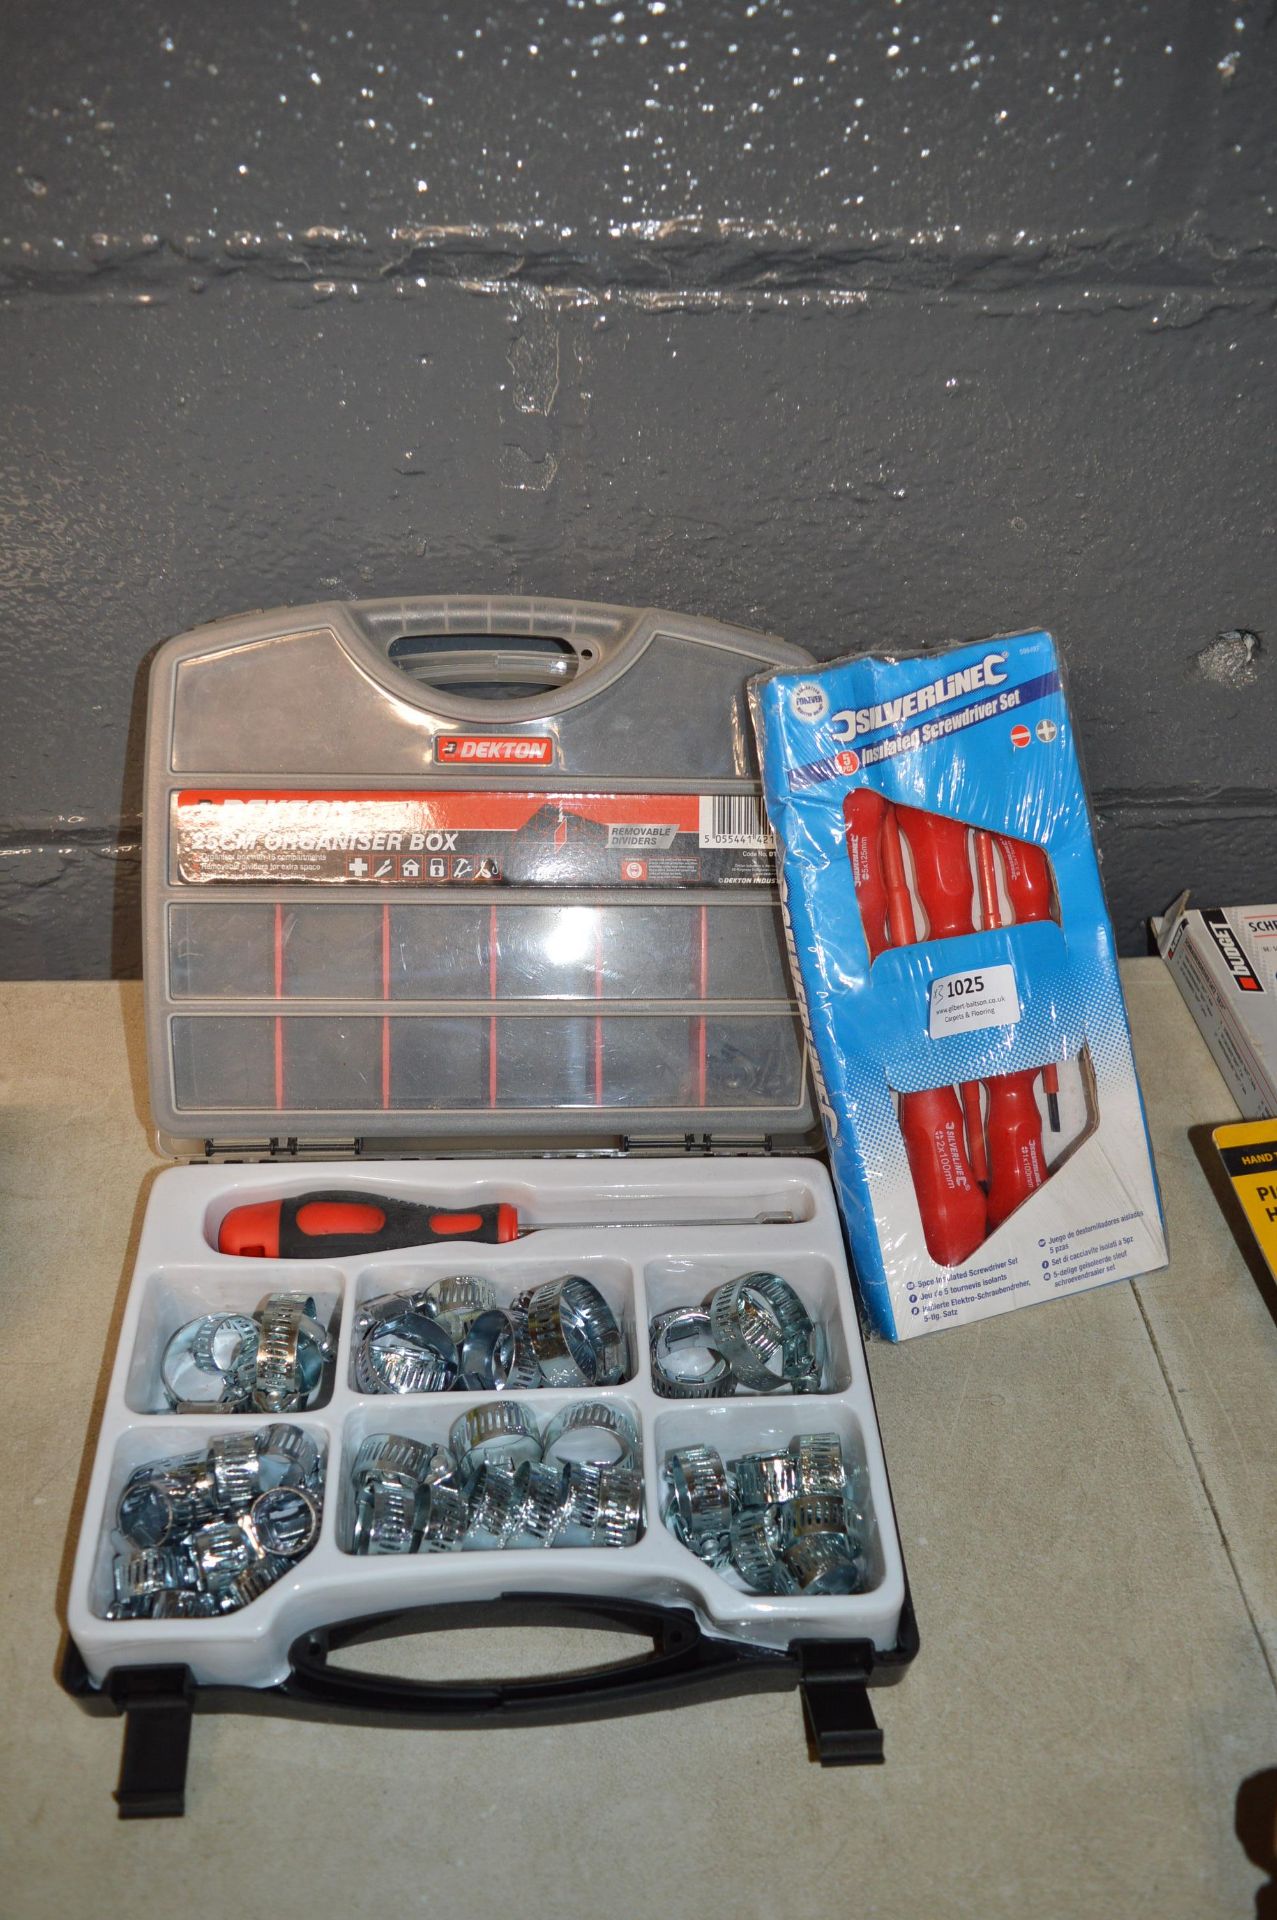 Tidy Tray, Assorted Jubilee Clips, and Silverline Screwdriver Set